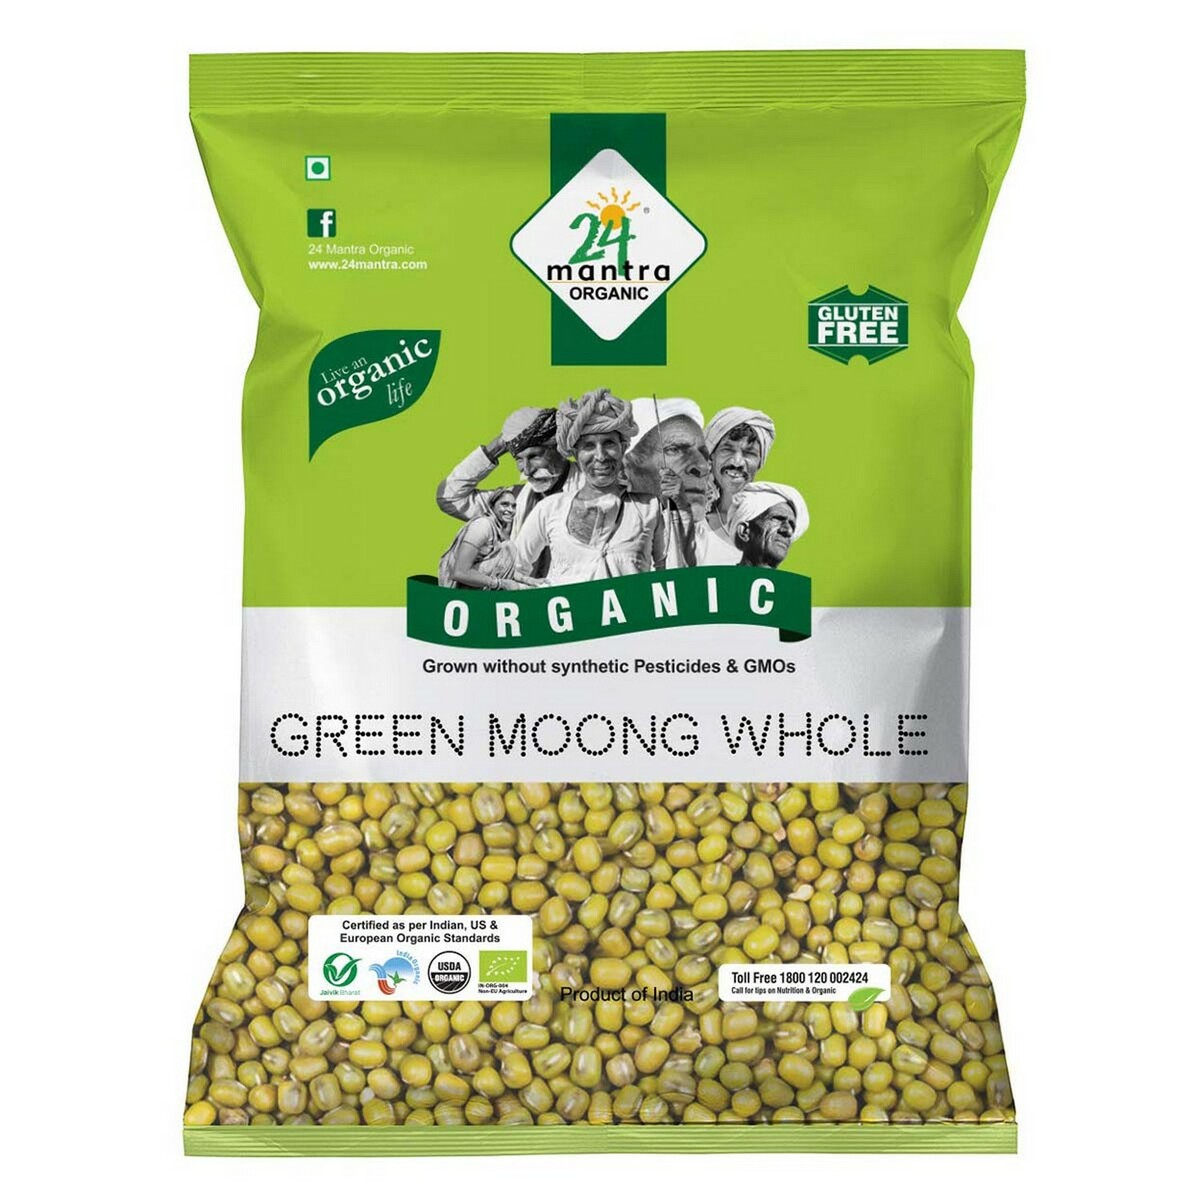 24 Mantra Organic Green Moong Whole 1kg